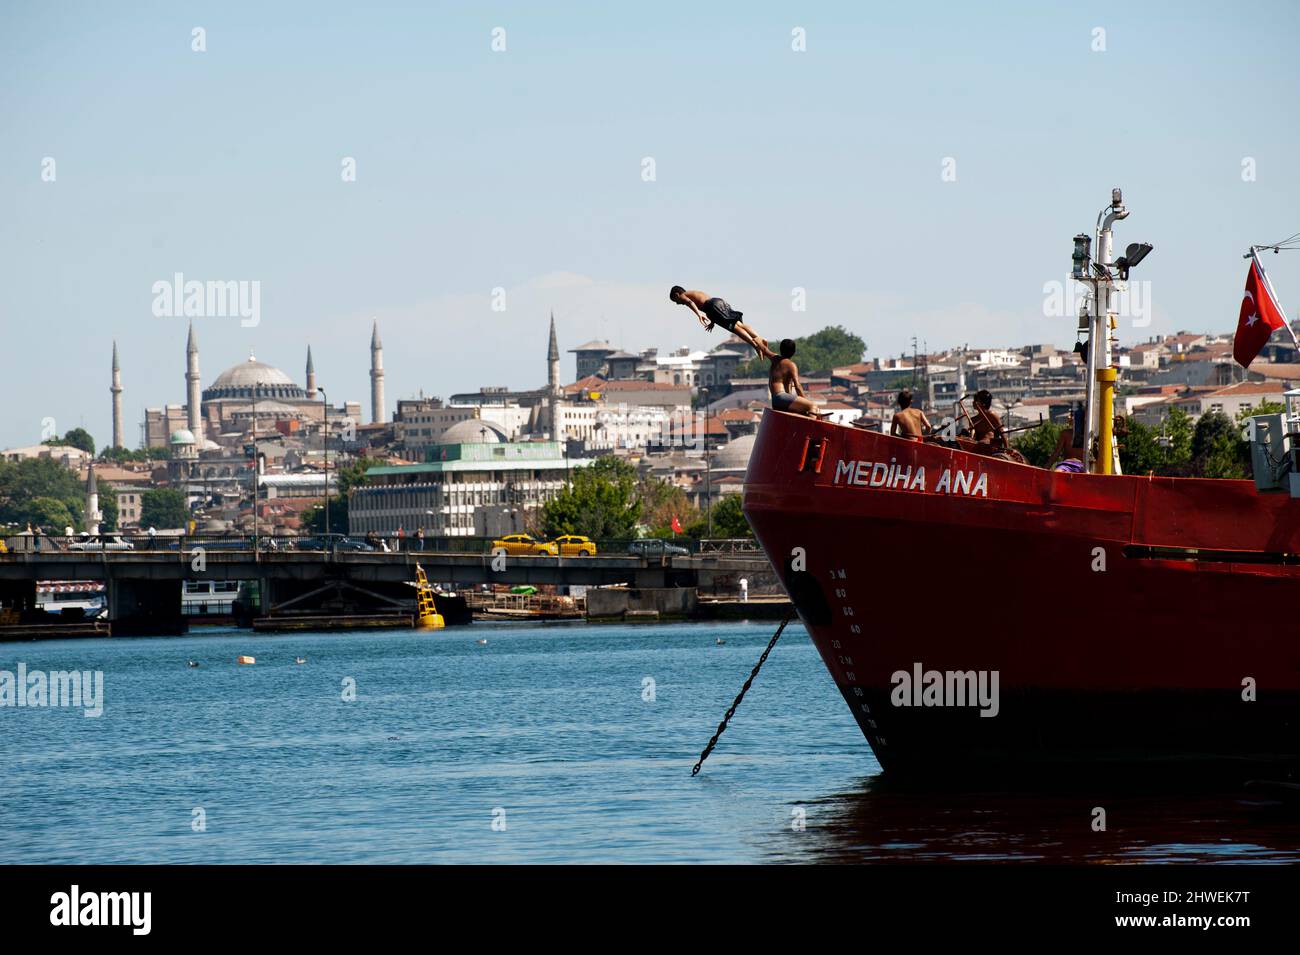 Young Turkish boy jumps off a boat into the harbor sea across from the Hagia Sophia Mosque in Istanbul, Turkey. Stock Photo